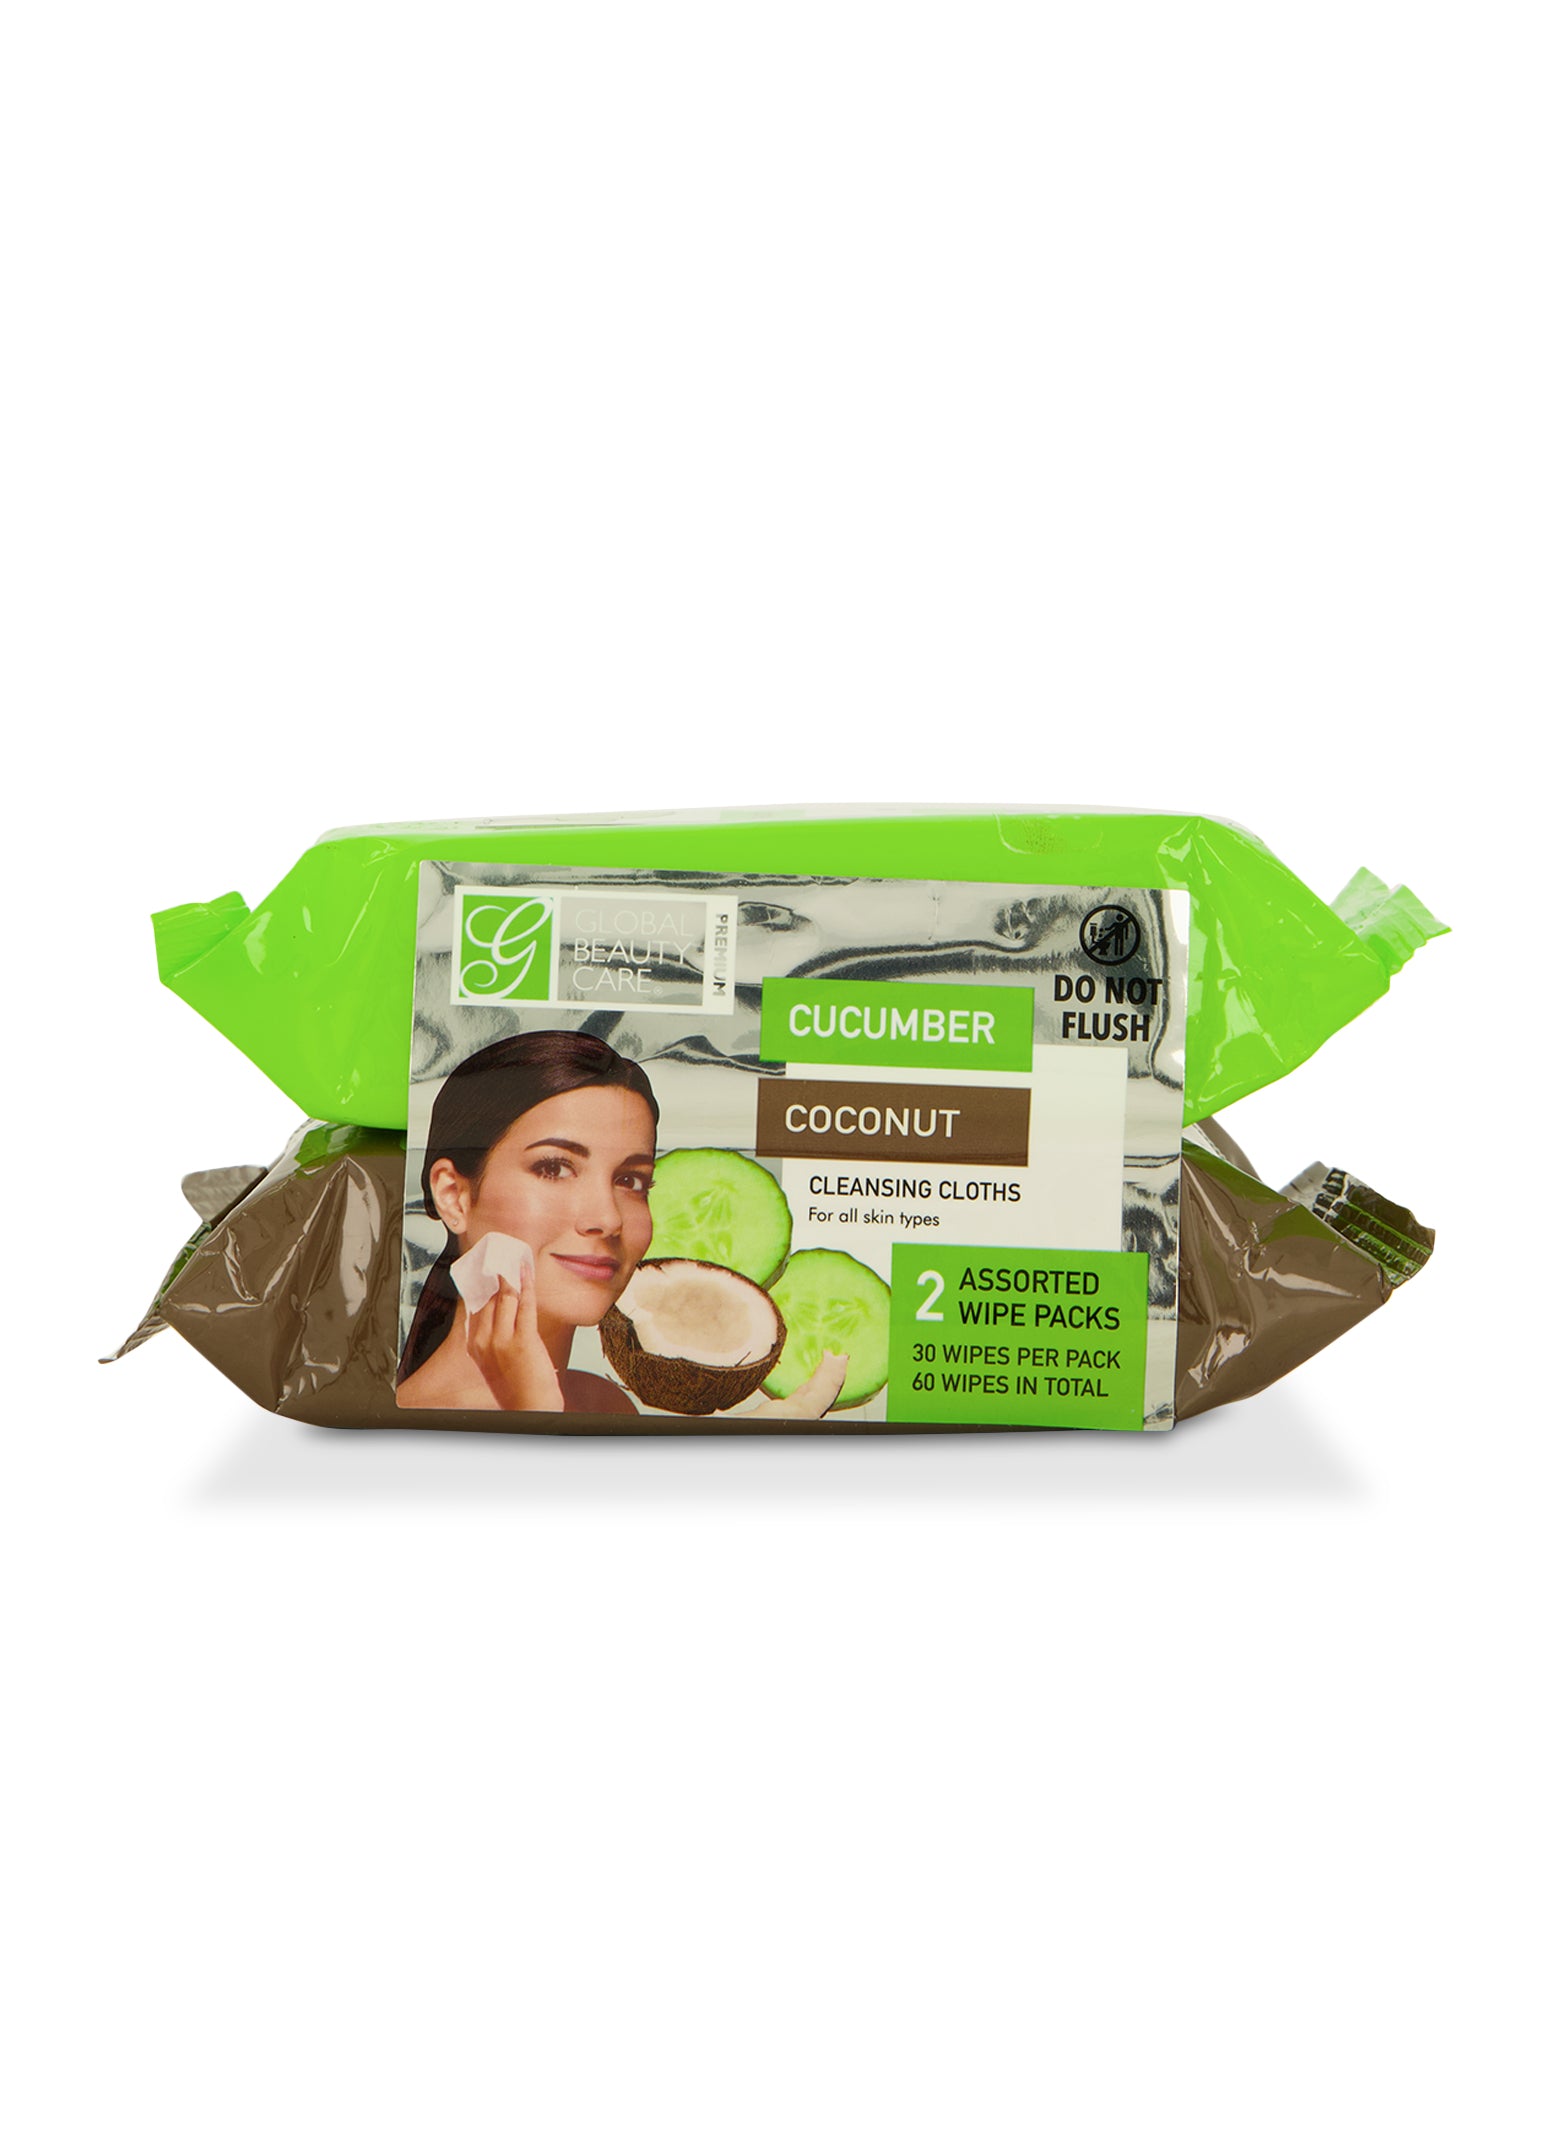 Womens Cucumber Coconut Facial Cleansing Wipes 2 Pack, Multi